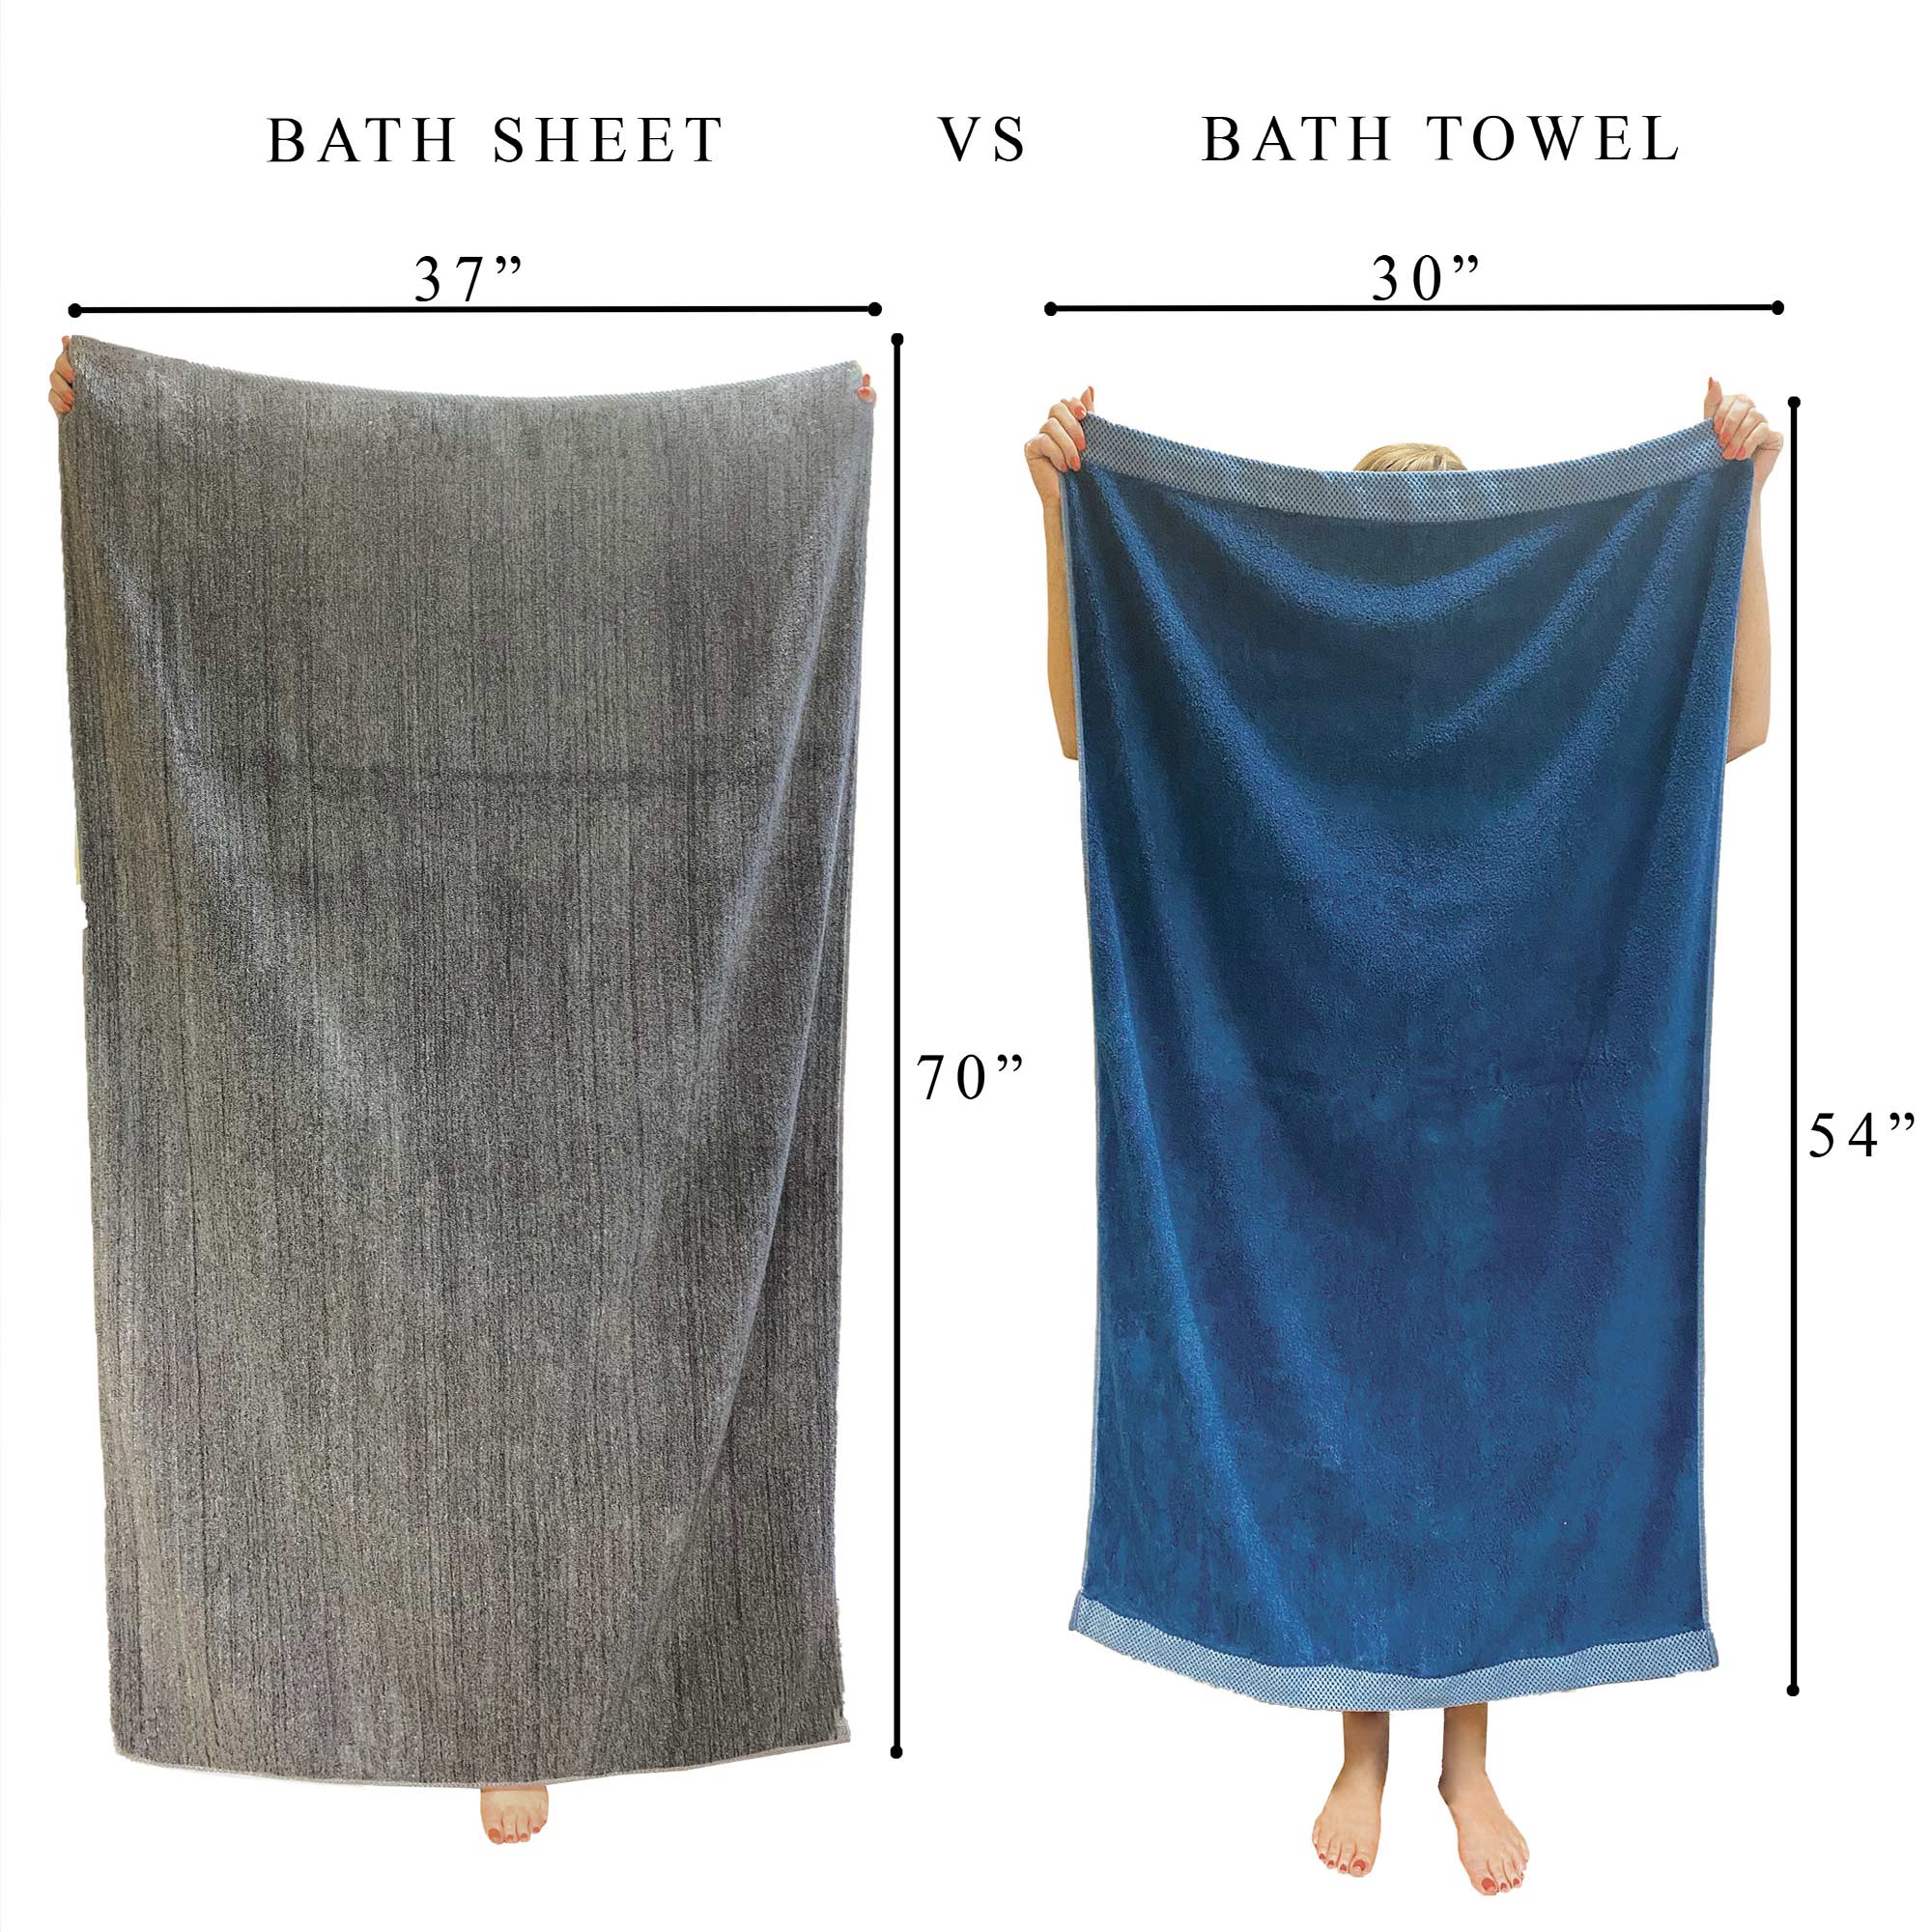 size chart showing difference in bath sheet and bath towel sizing holding them up